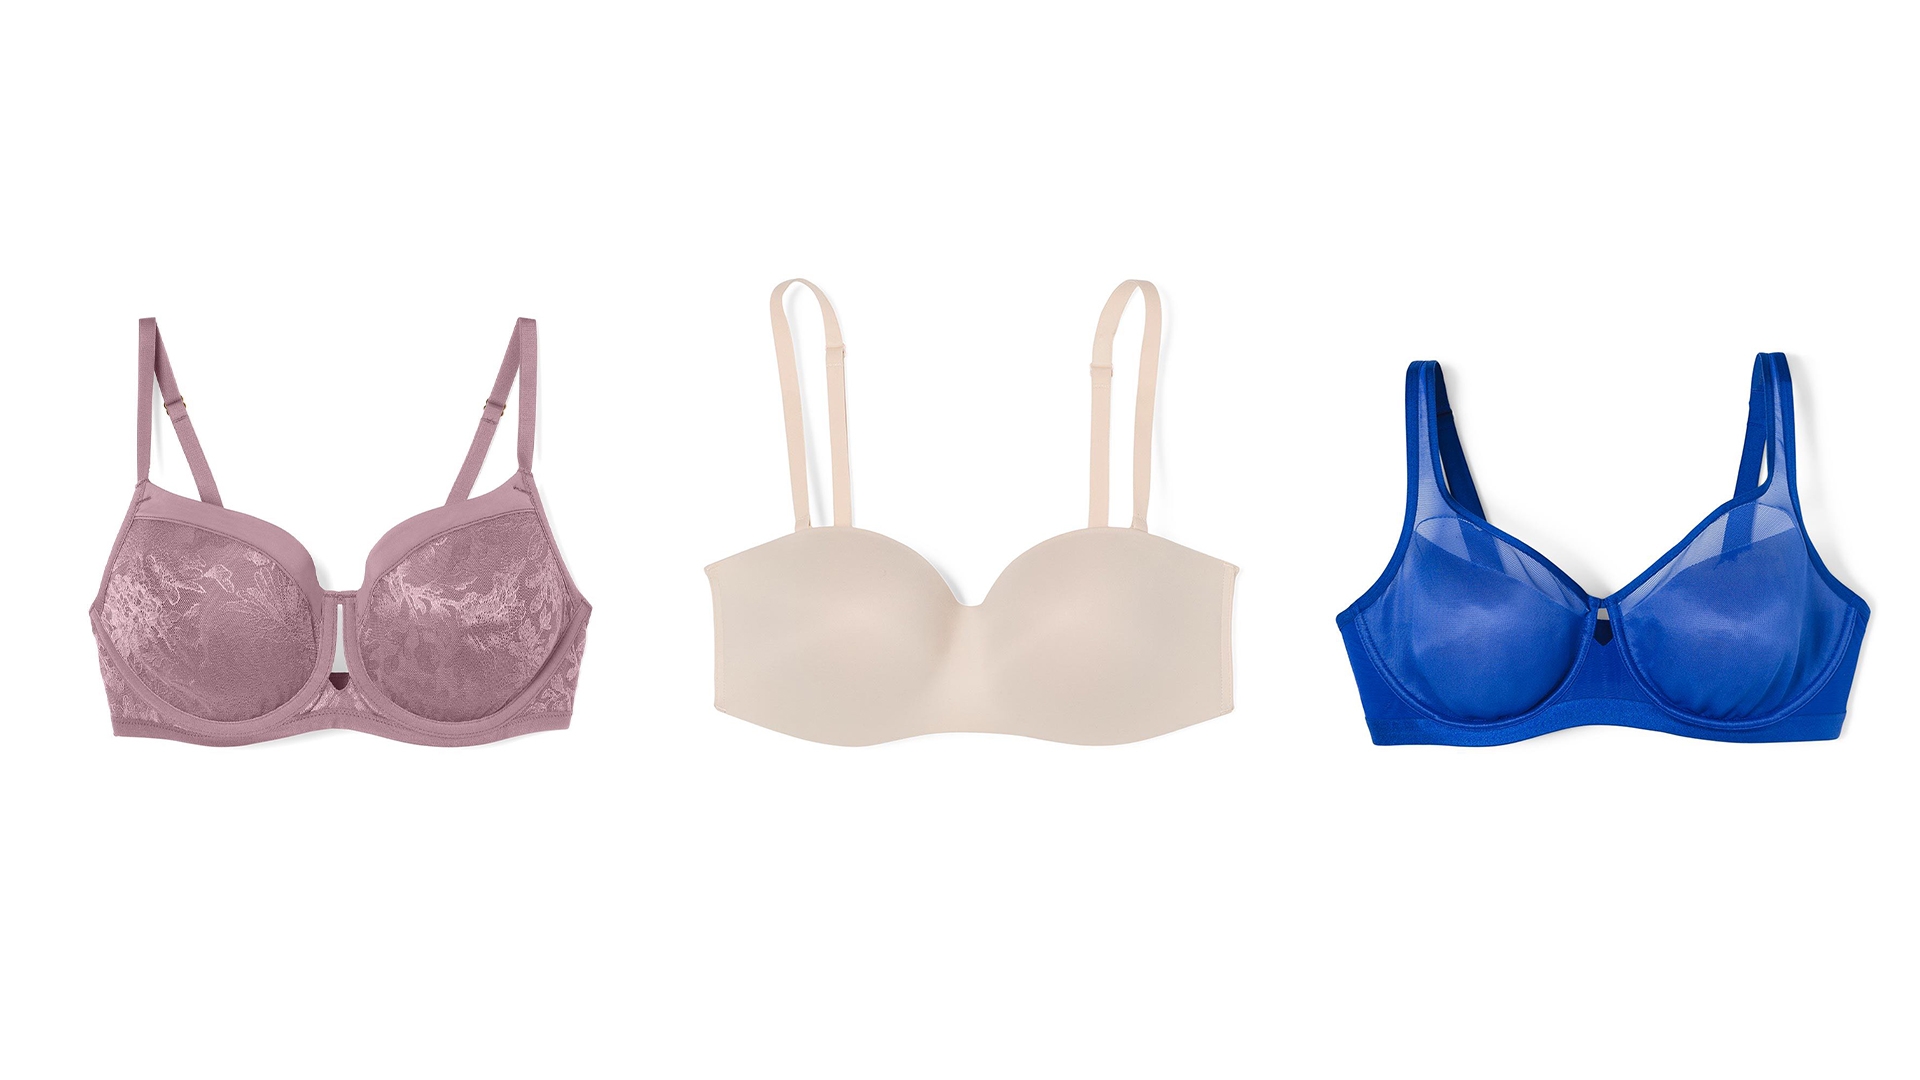 Soma<sup class=st-superscript>®</sup> women’s bras including a dusty rose lace bra, nude wireless multi-way bra, and blue unlined balconette bra.